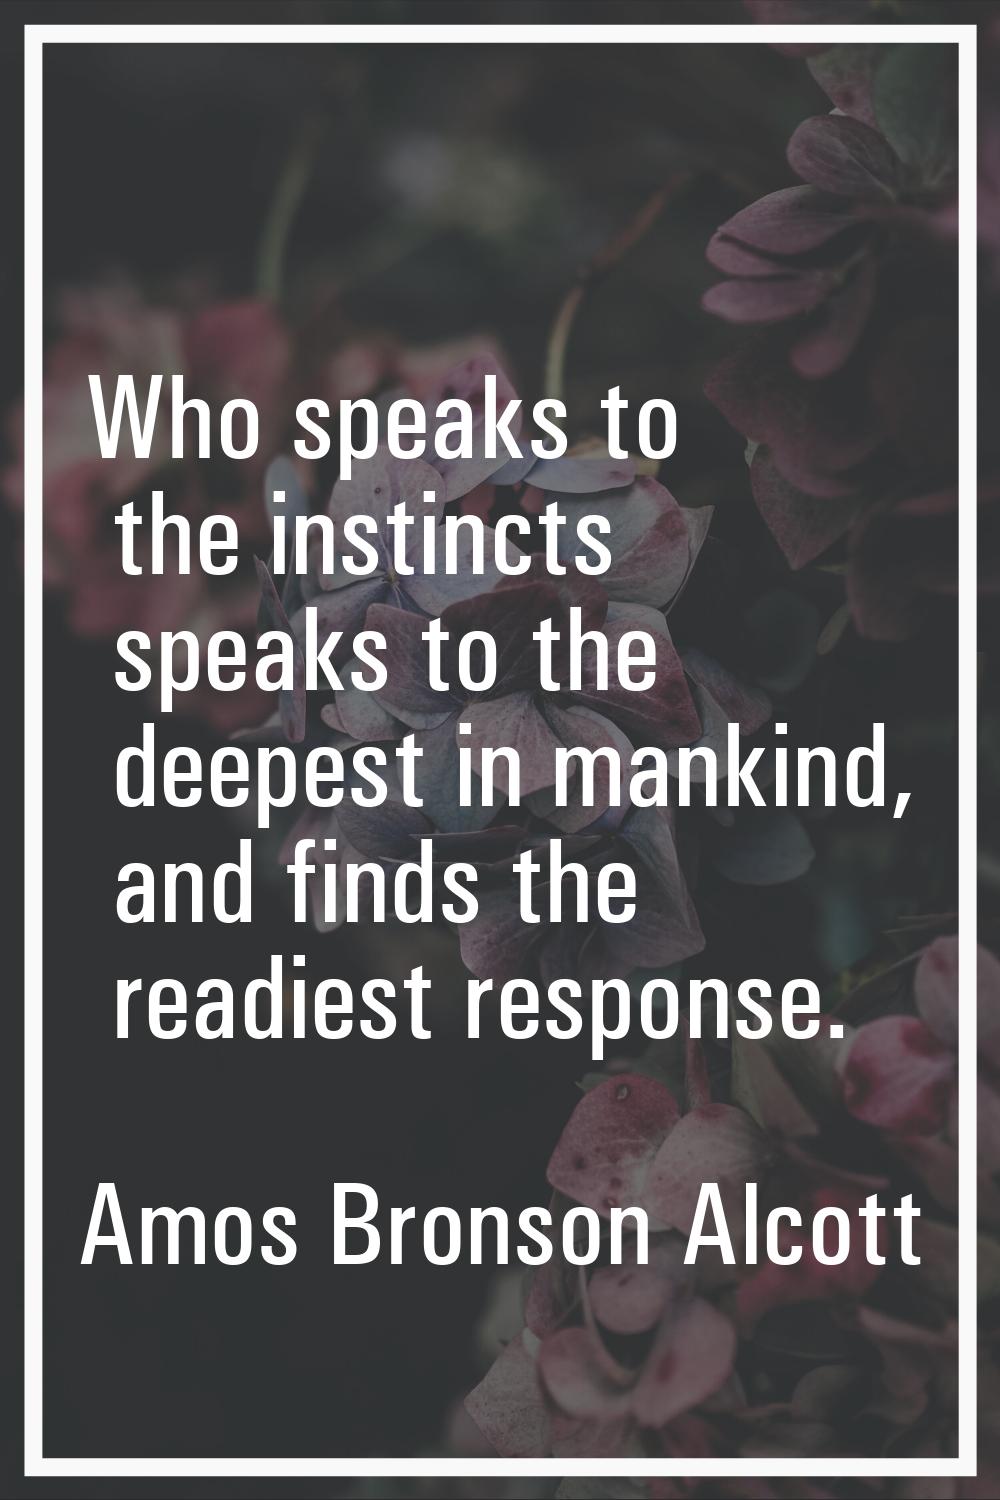 Who speaks to the instincts speaks to the deepest in mankind, and finds the readiest response.